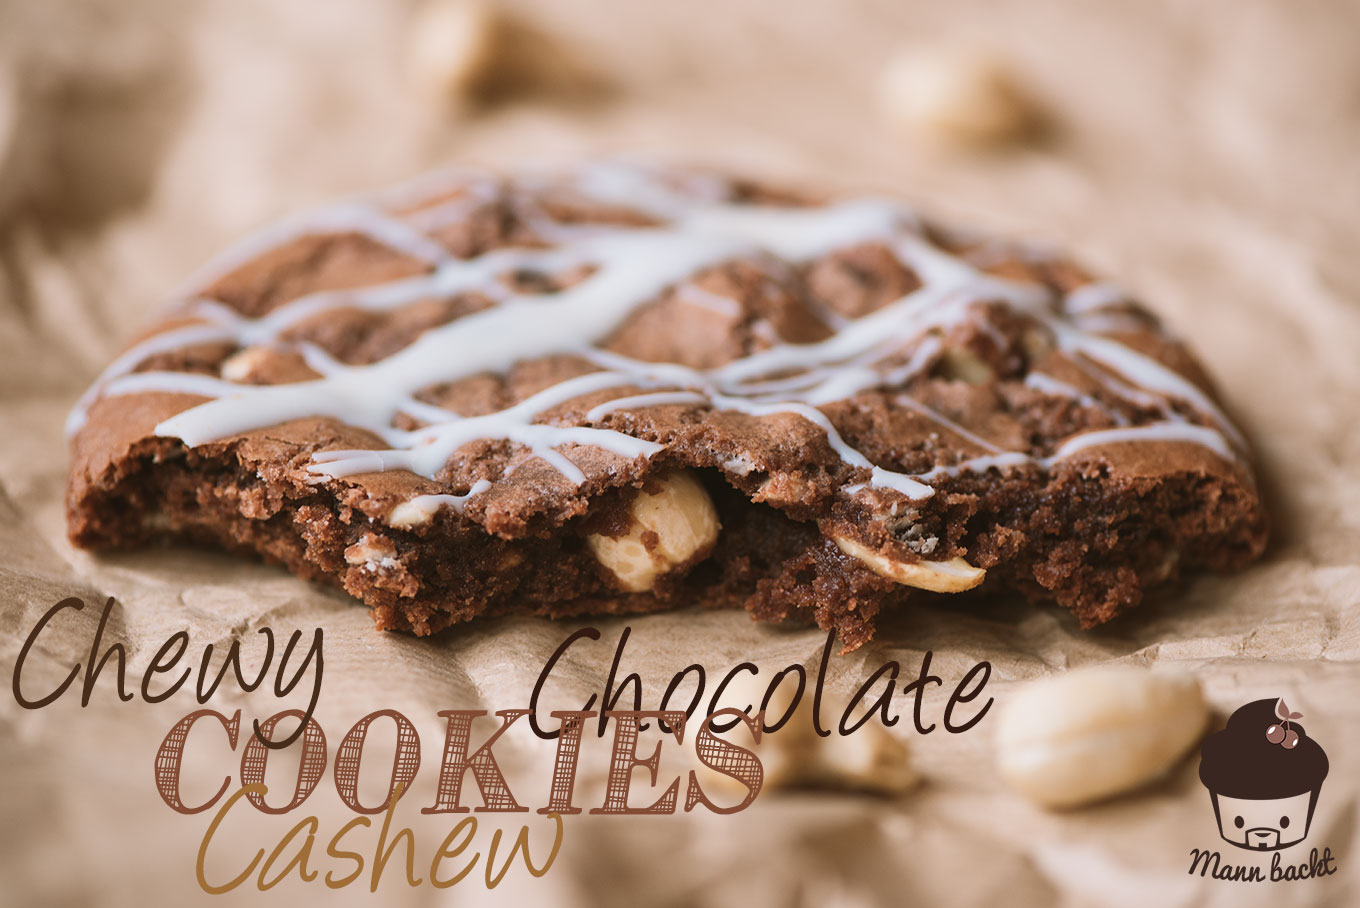 Chewy-Chocolate-Cashew-Cookies-by-Mann-backt-Marian-Moschen-small